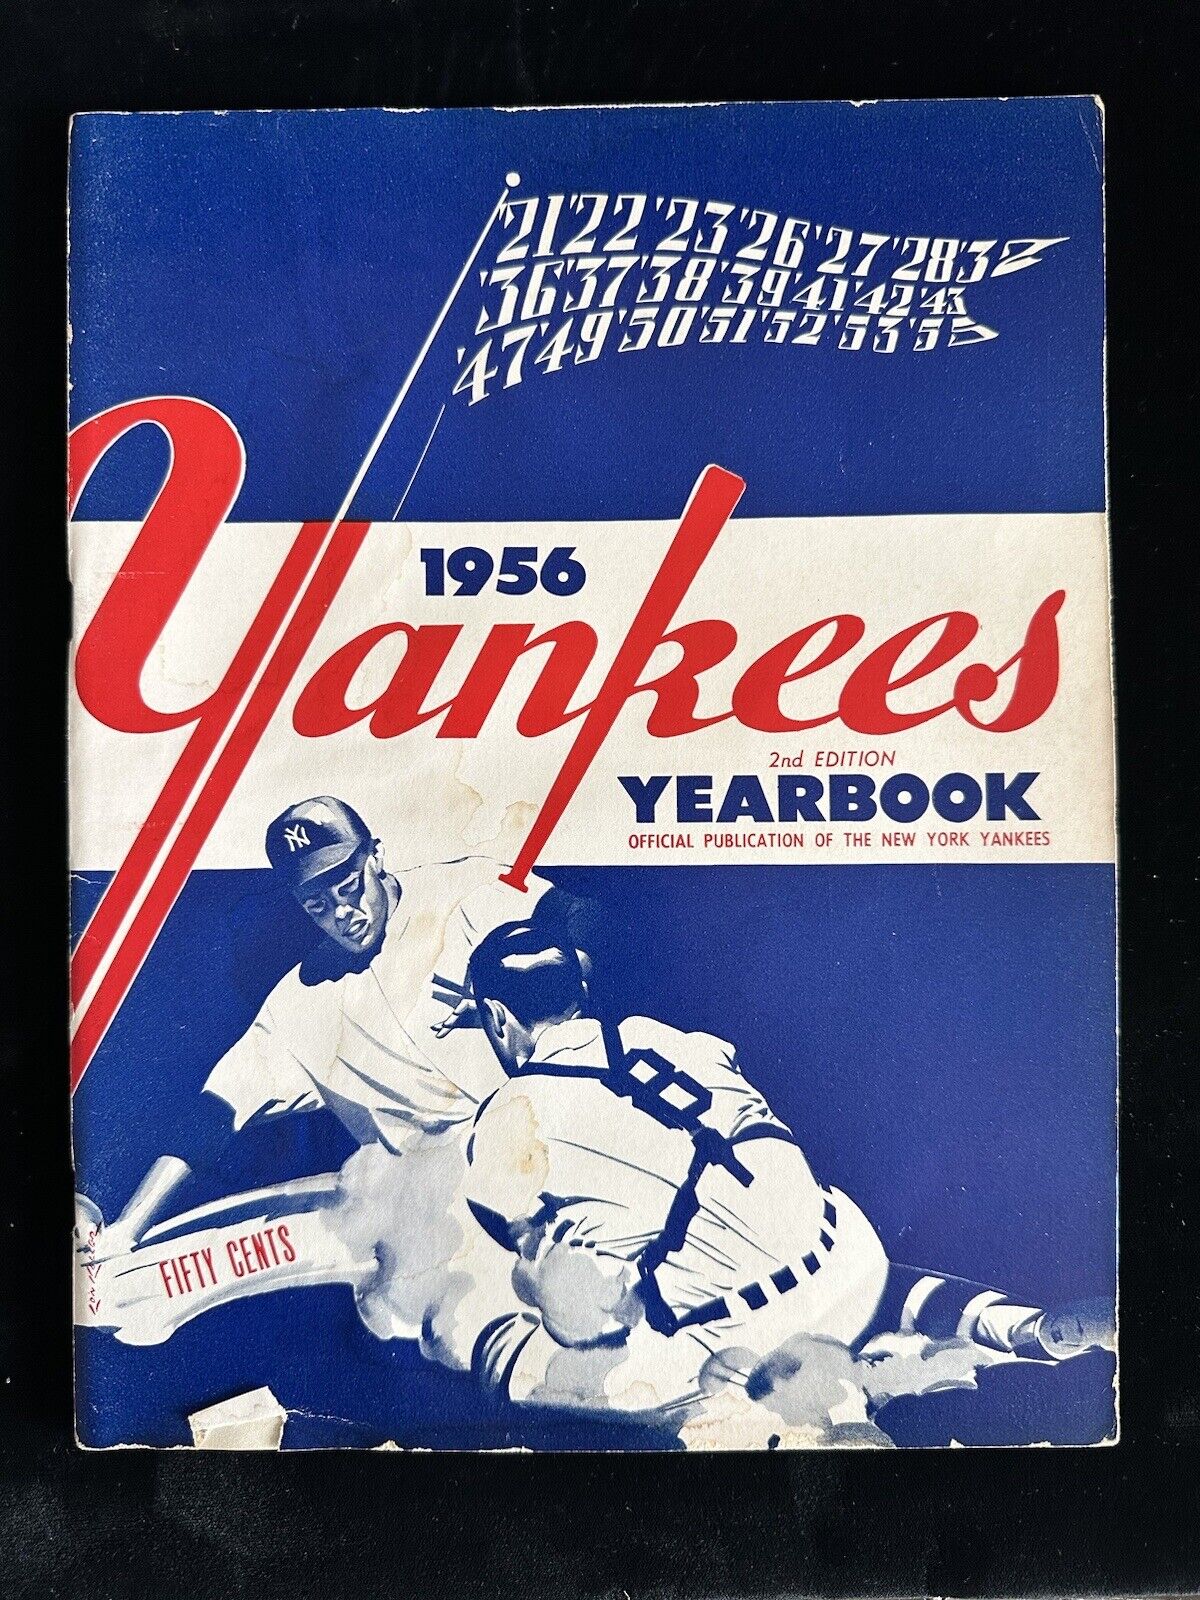 1956 New York Yankees Yearbook 2nd Edition Blue Cover